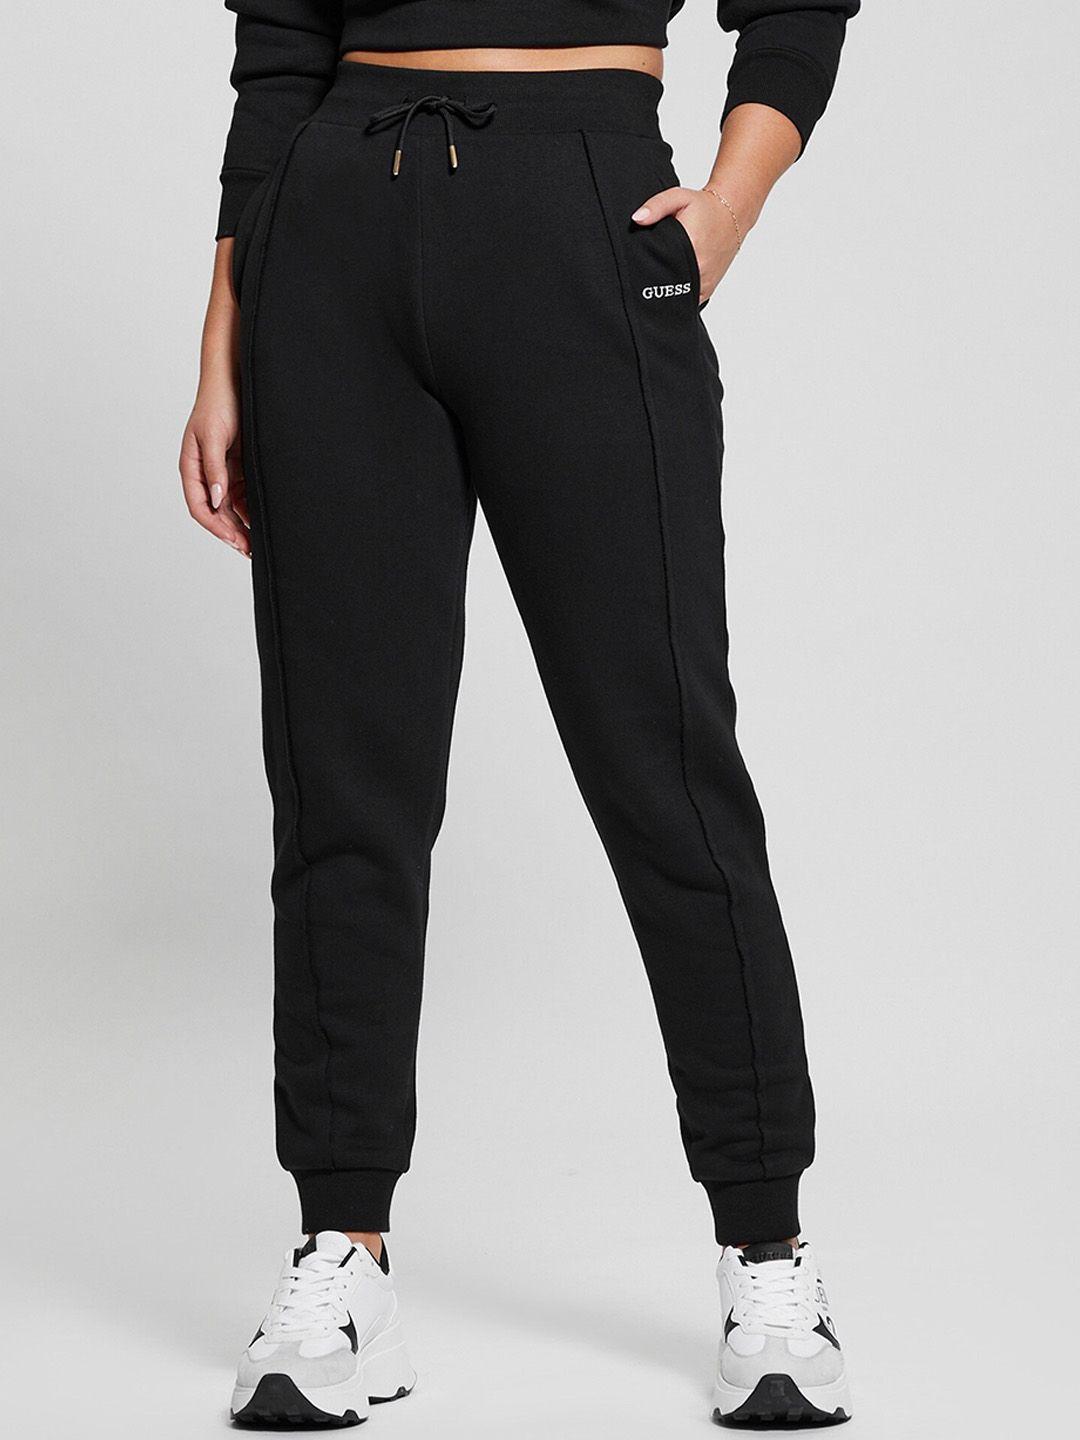 guess women mid-rise jogger